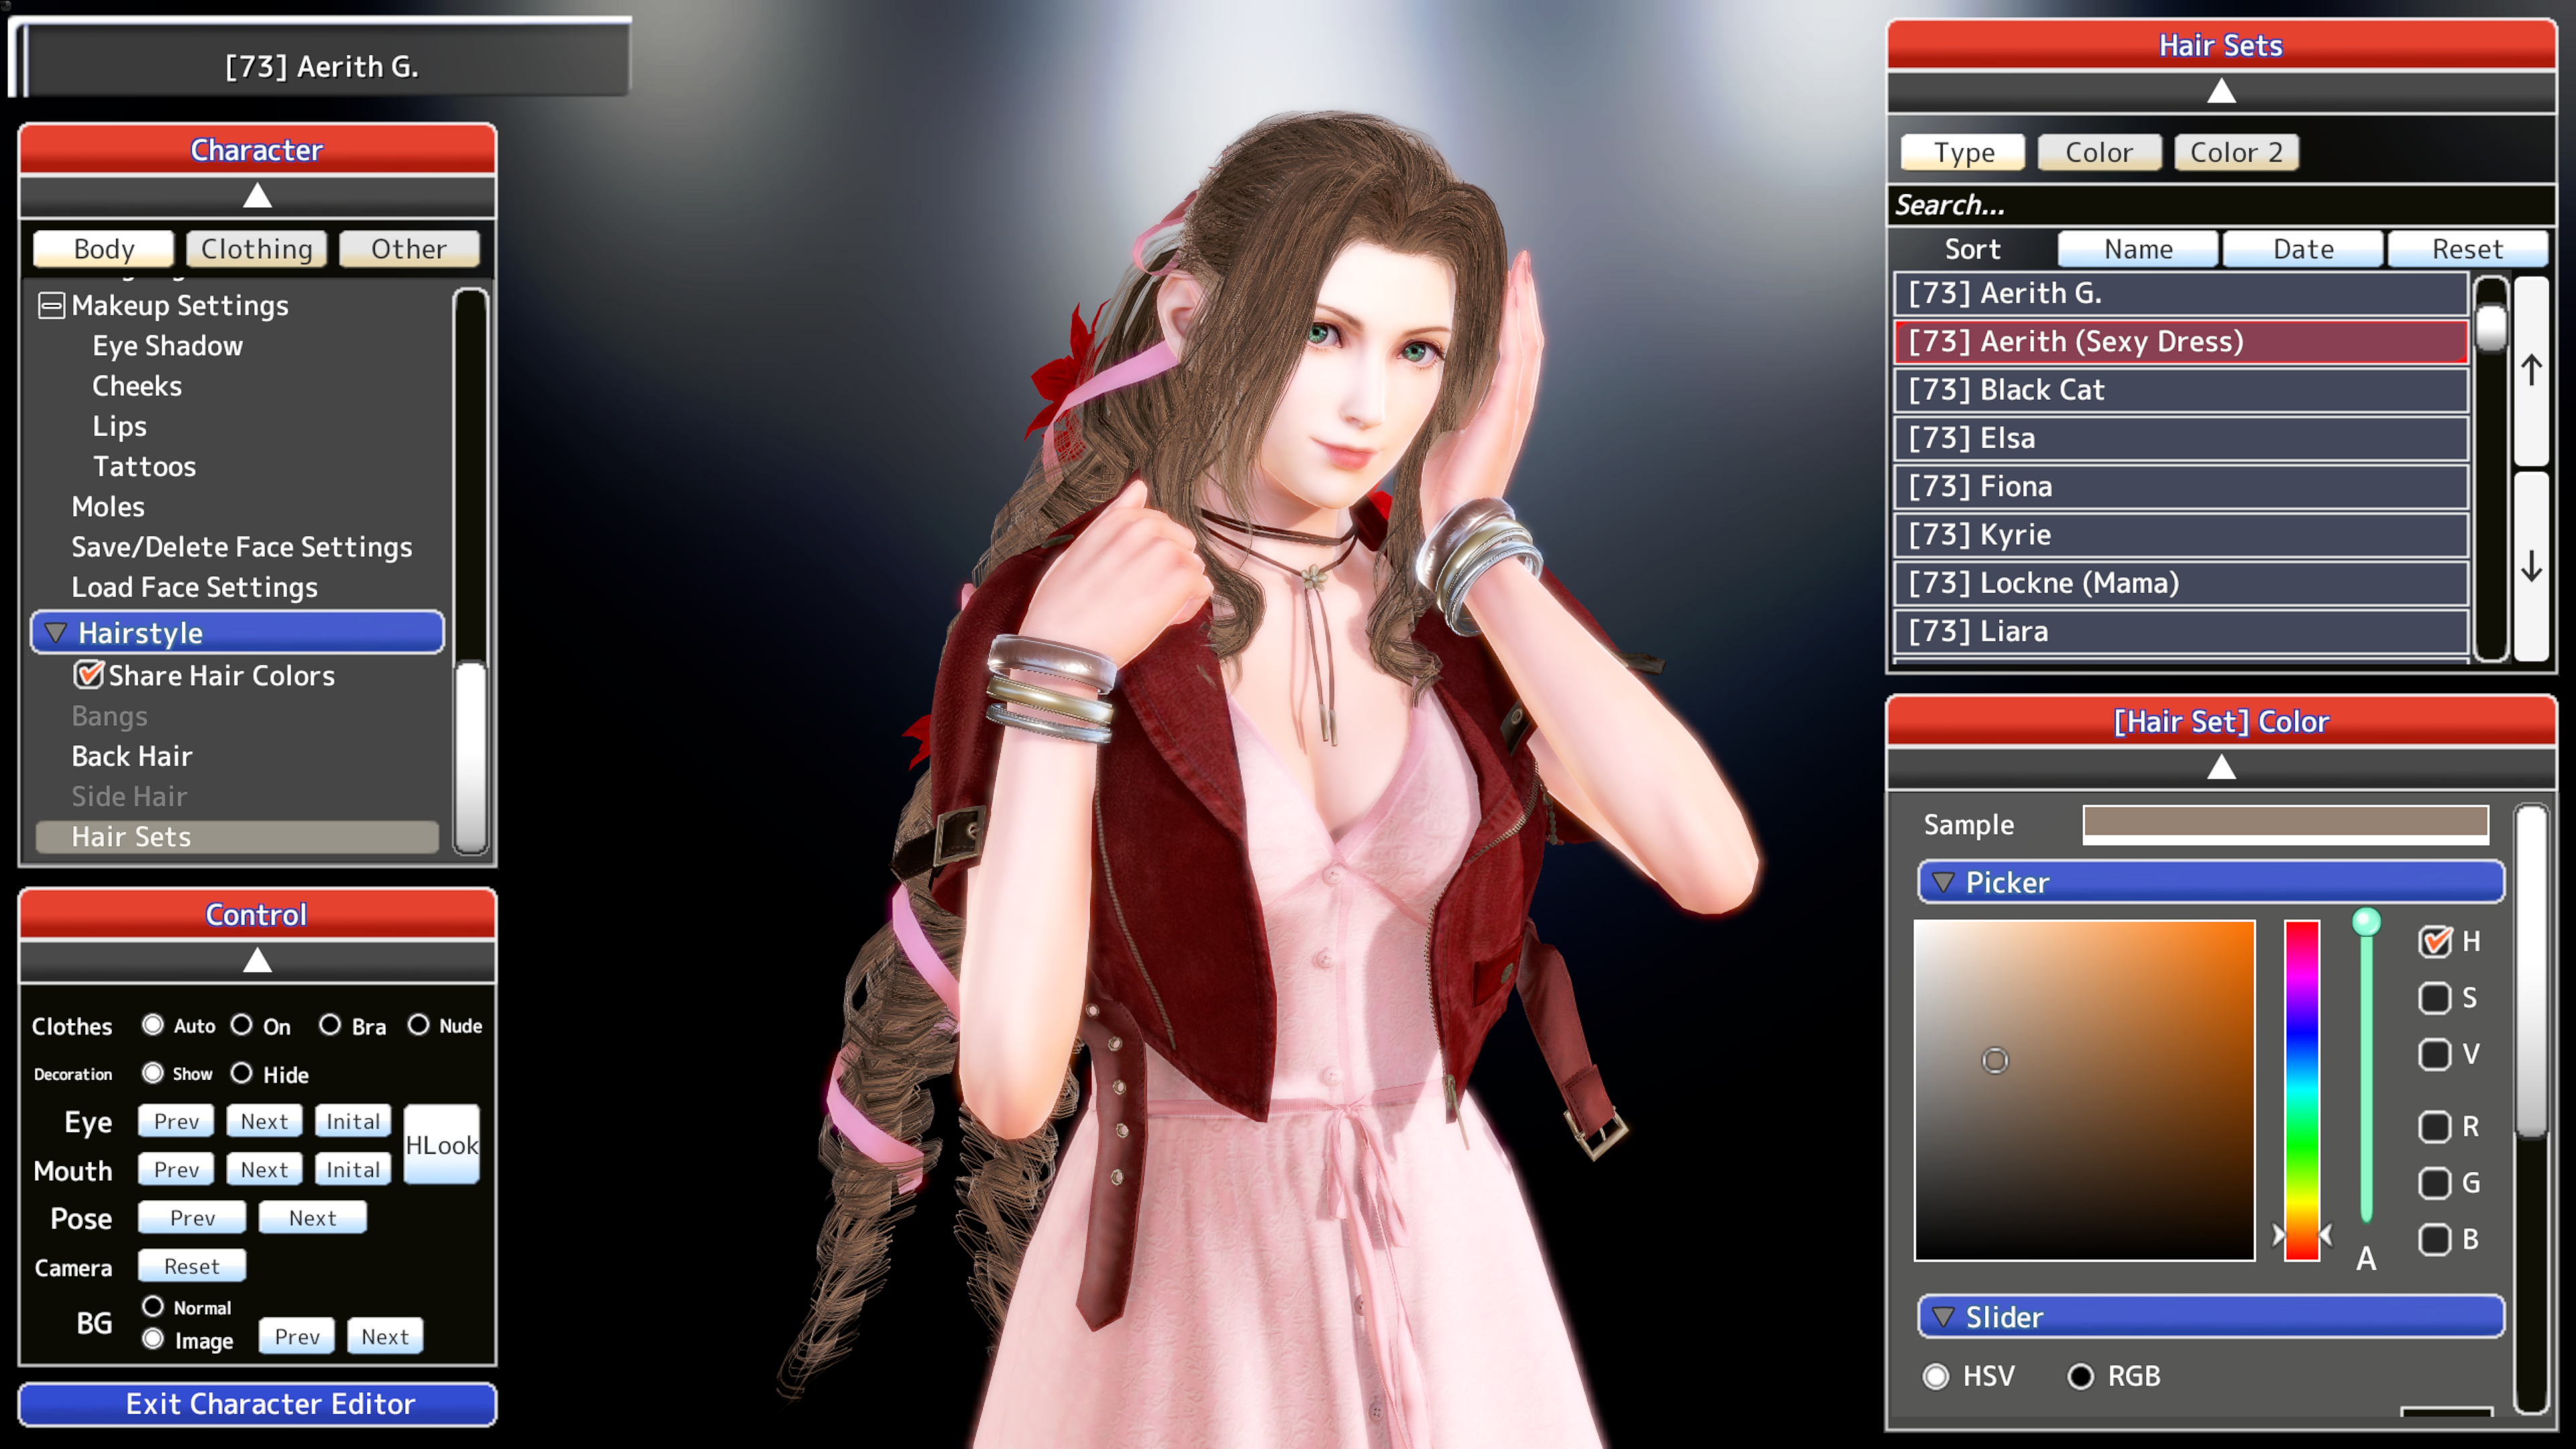 In honey select 2 they are installed in bepinex\plugins folder. 